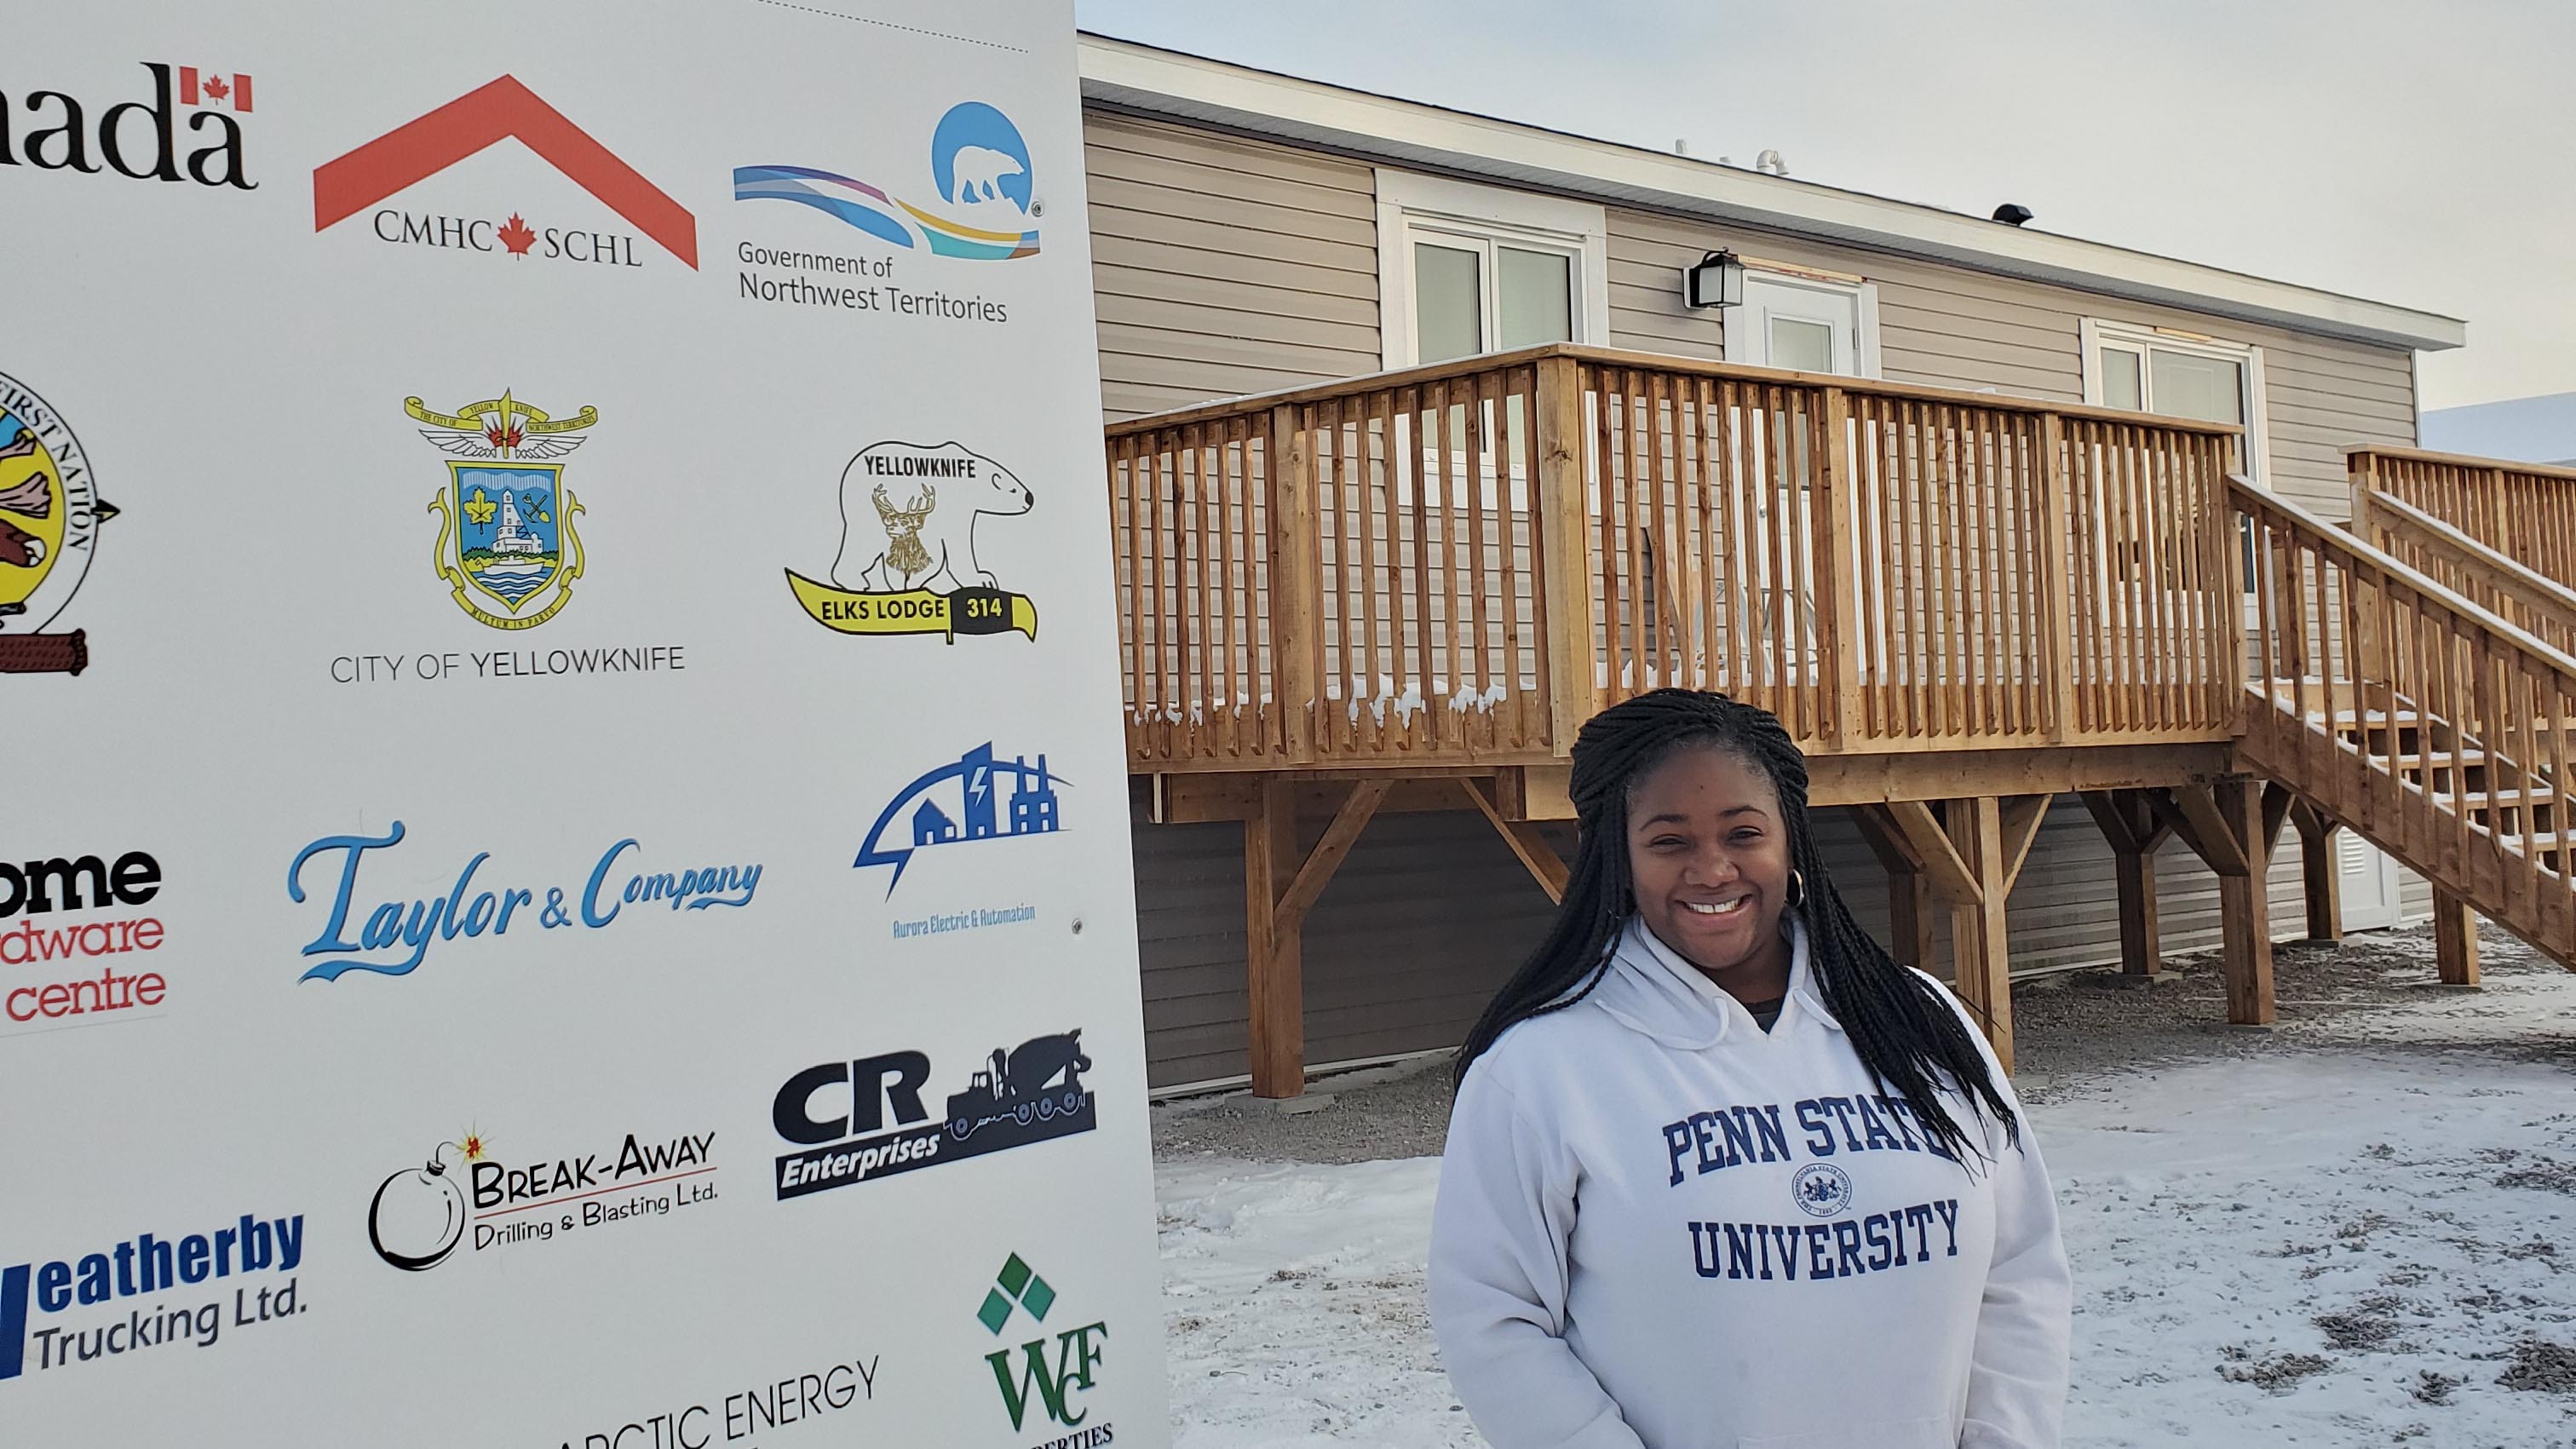 Miriam Pallard stands in front of a home built through Habitat for Humanity. She is wearing a sweatshirt with the words "Penn State University" on it.